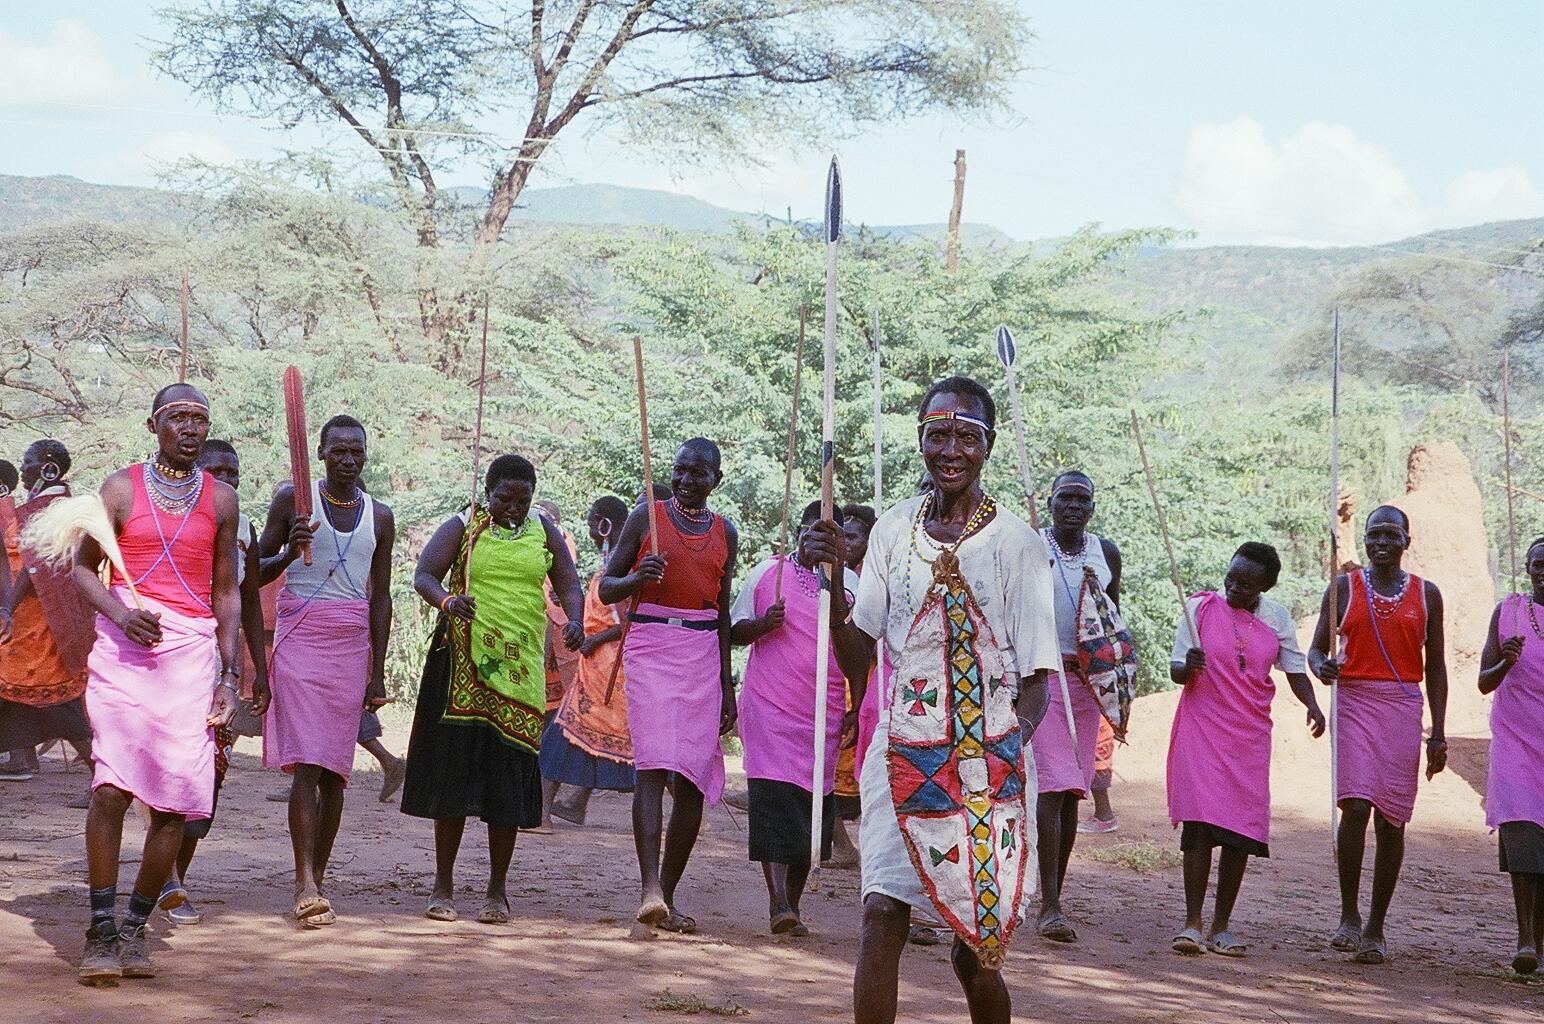 The Endorois community has suffered systematic repression by the Kenyan authorities, beginning with their eviction from ancestral lands. Credit: Minority Rights Group.